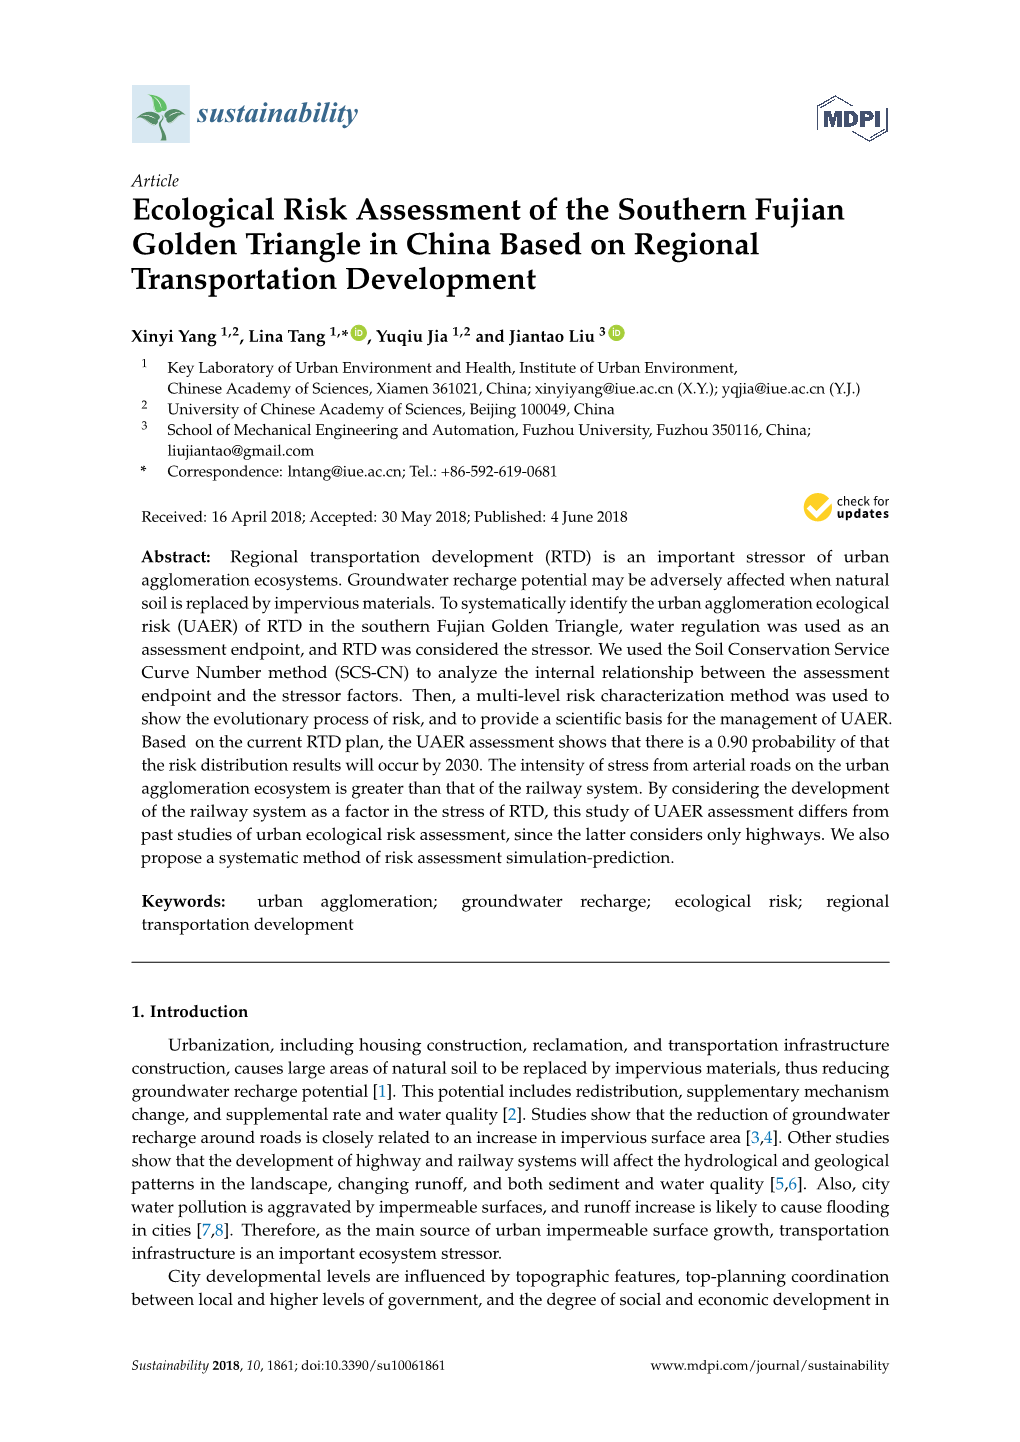 Ecological Risk Assessment of the Southern Fujian Golden Triangle in China Based on Regional Transportation Development